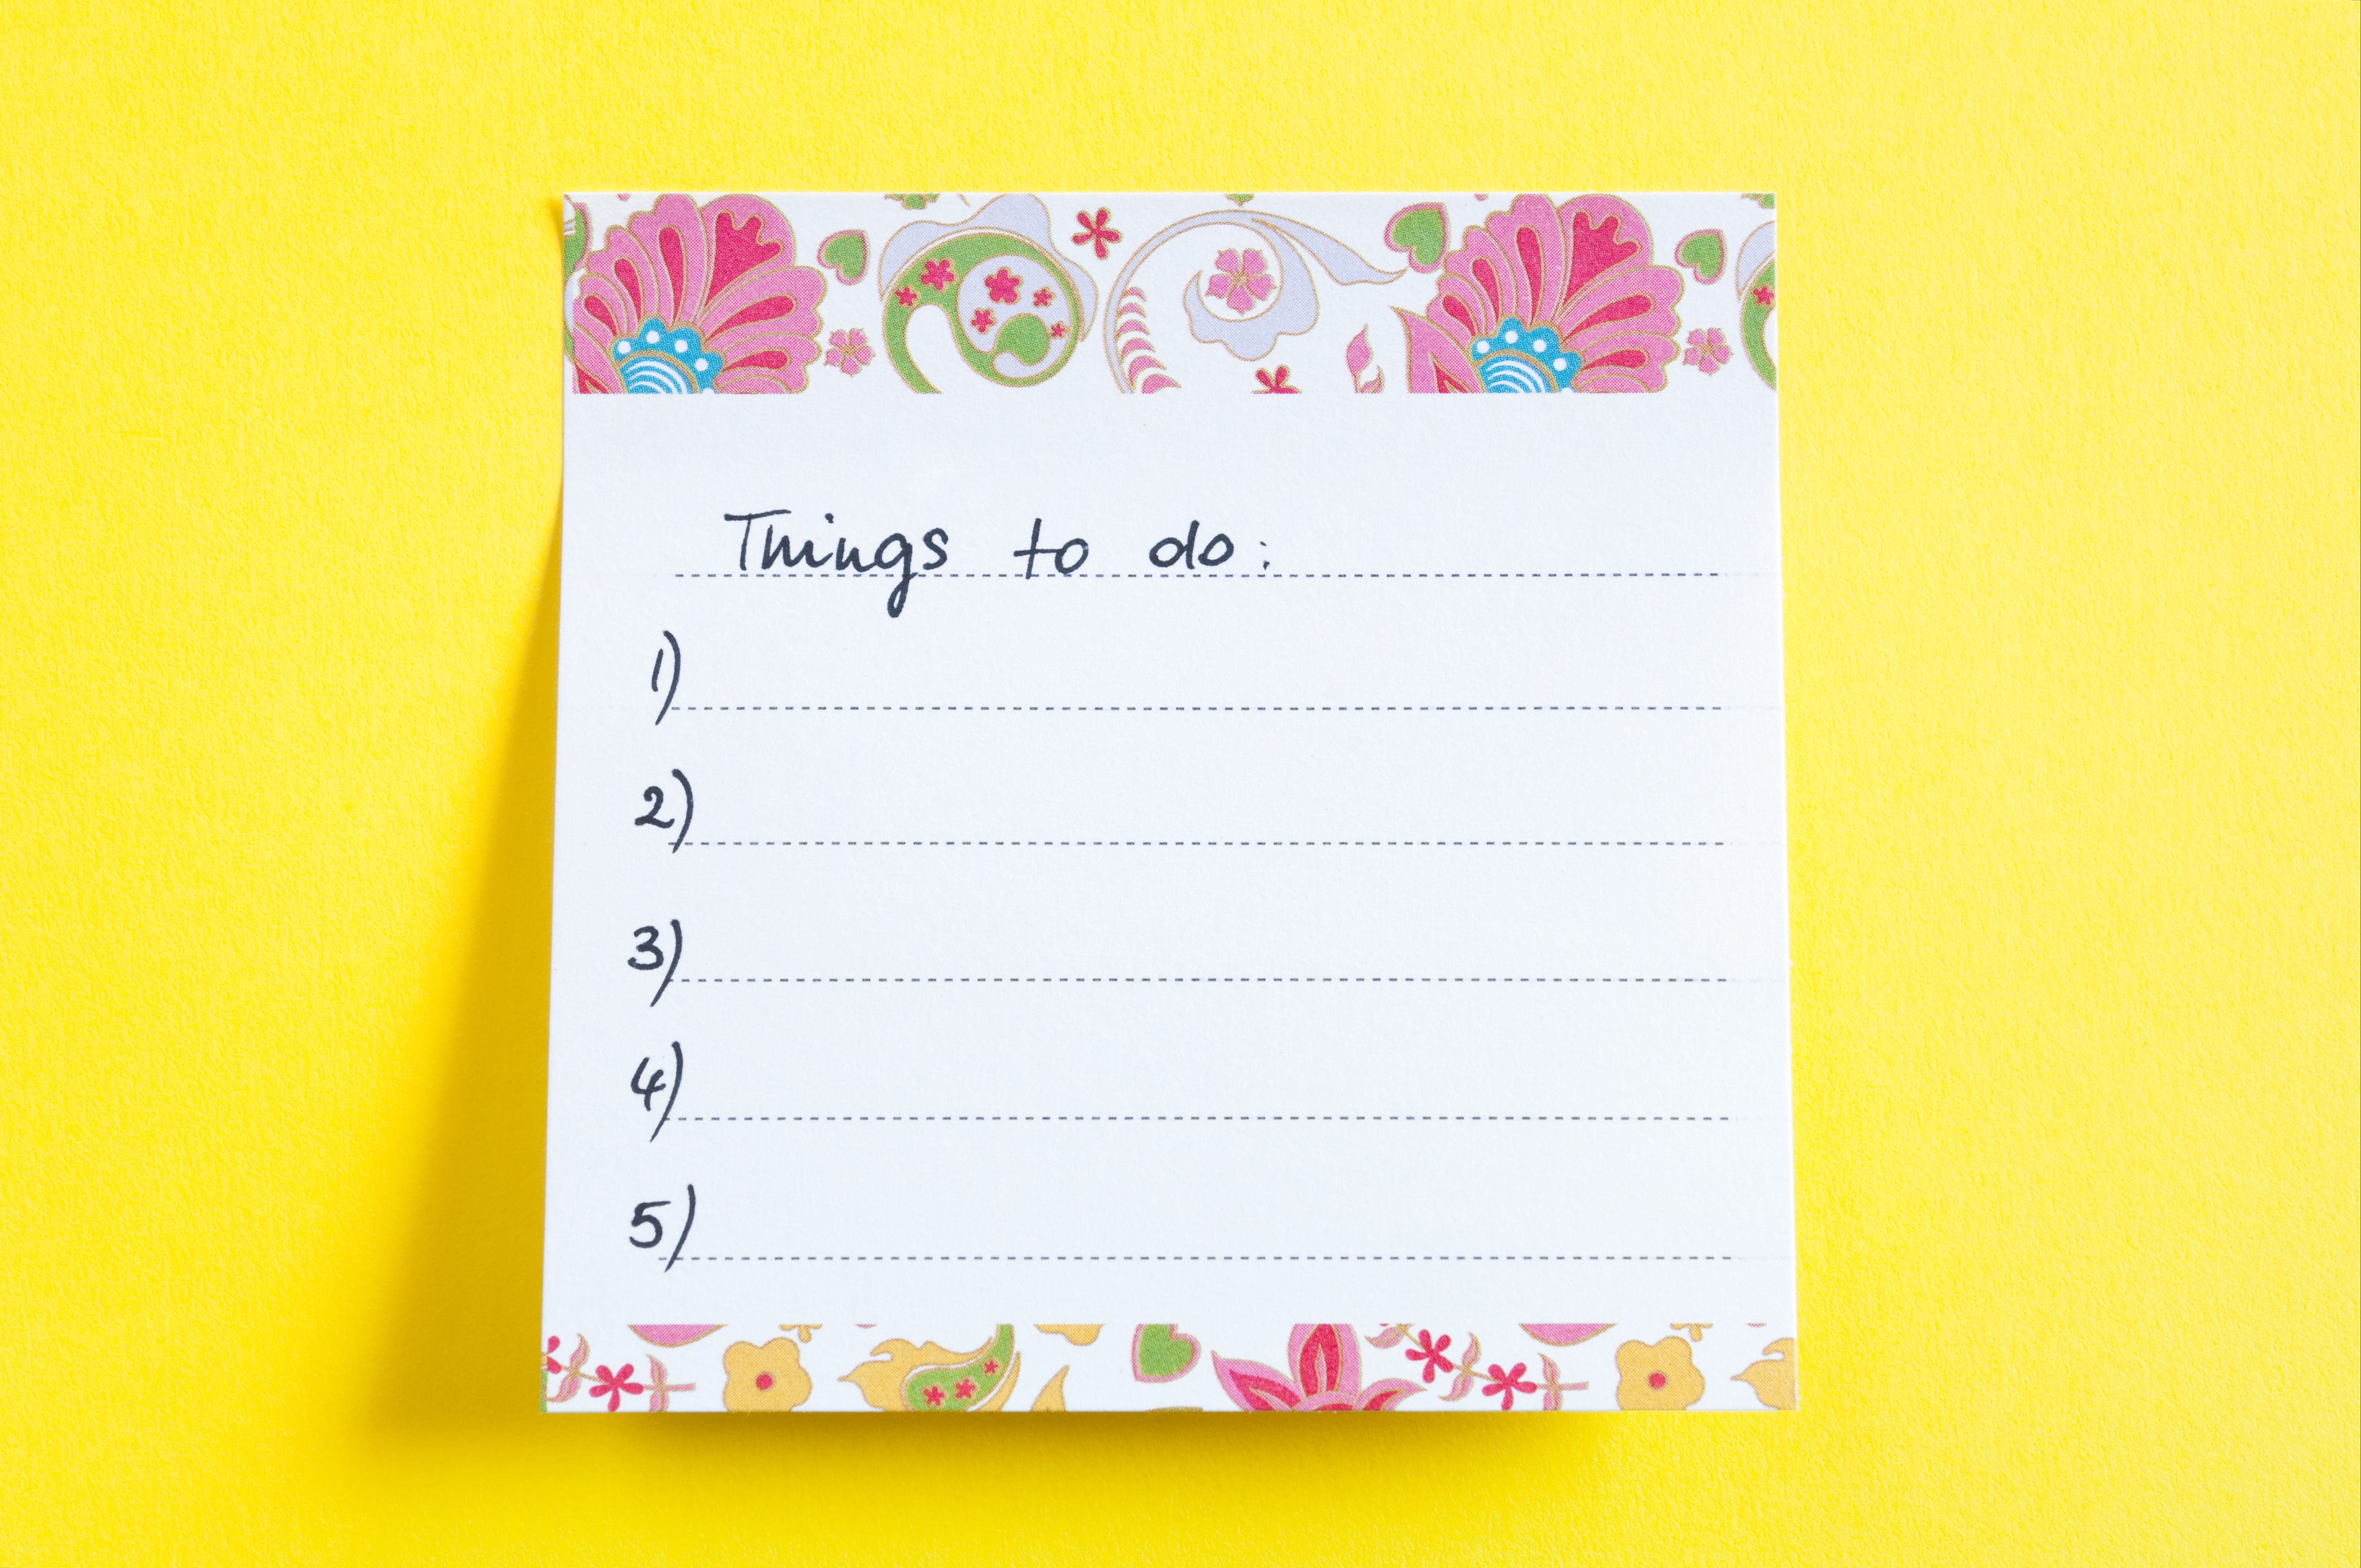 Things to do-Liste